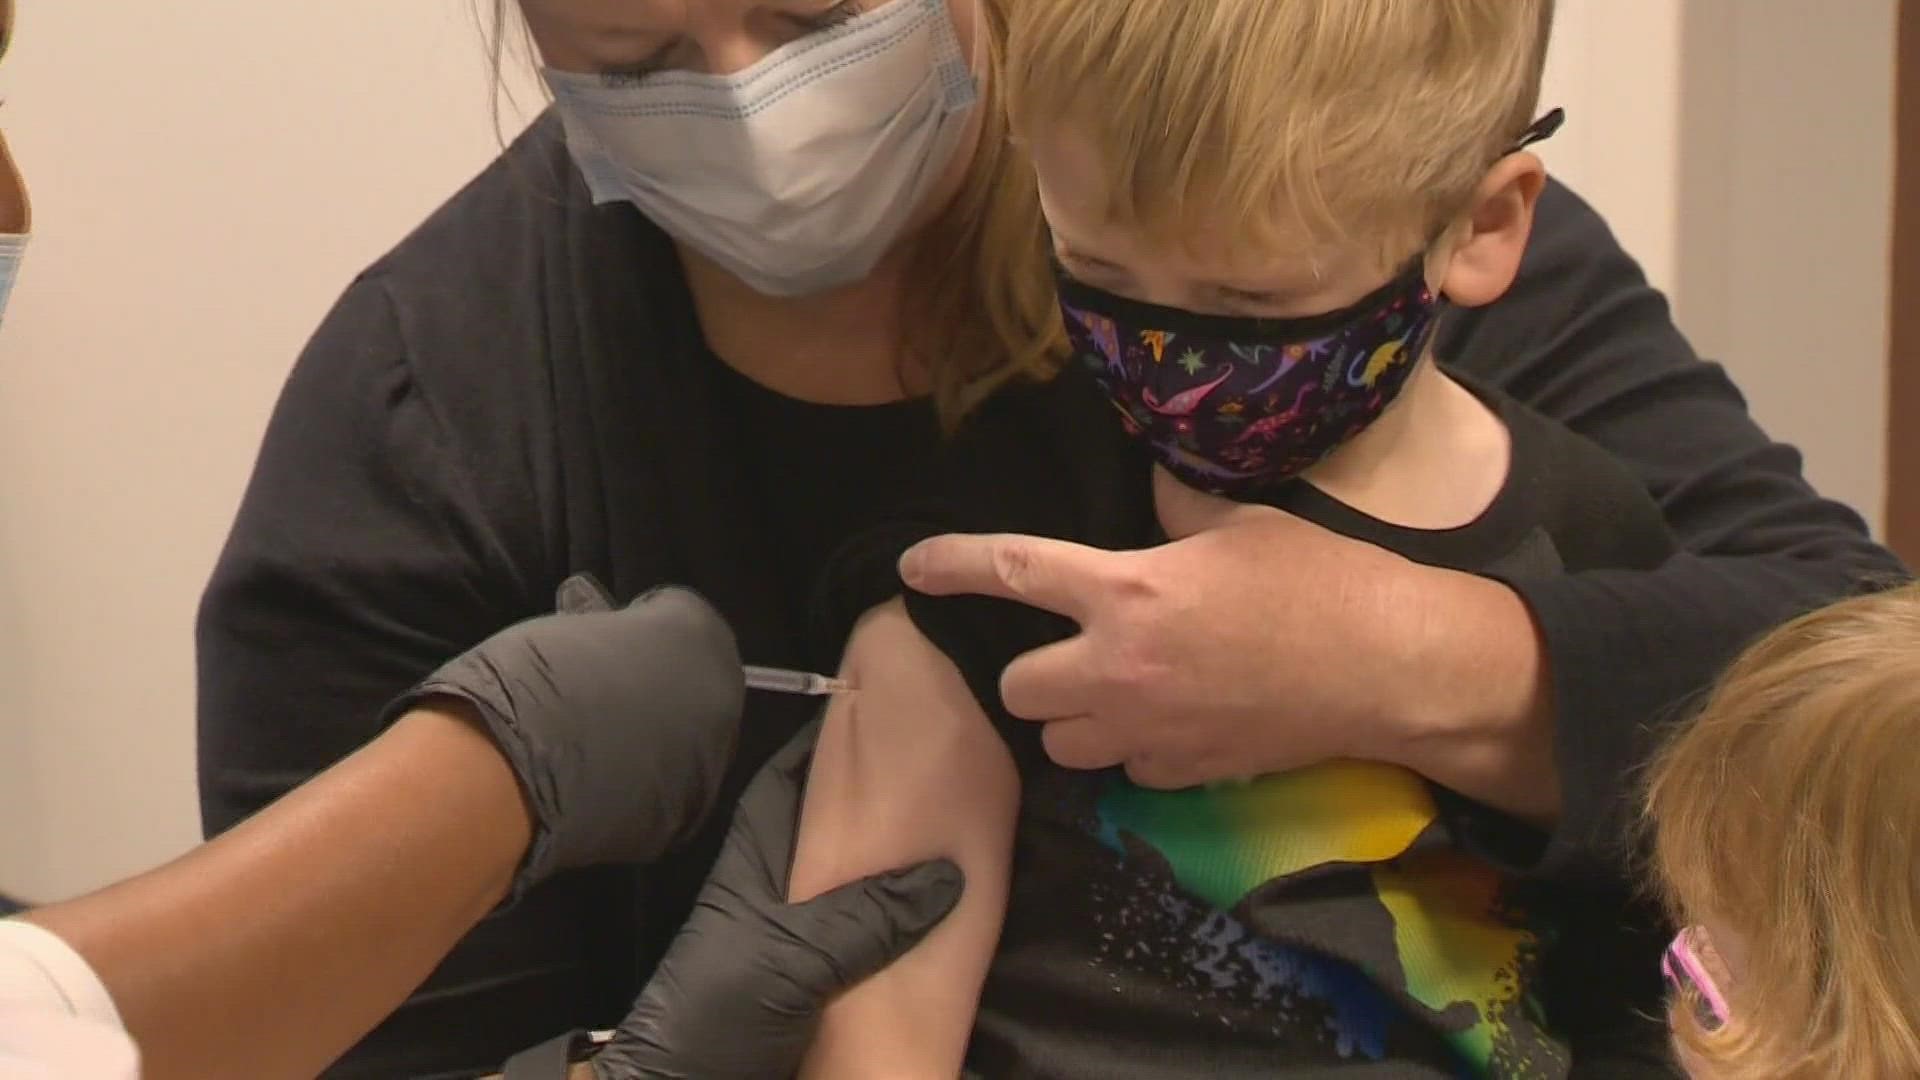 We talked to a Cook Children's pediatrician about getting your kids vaccinated this flu season.